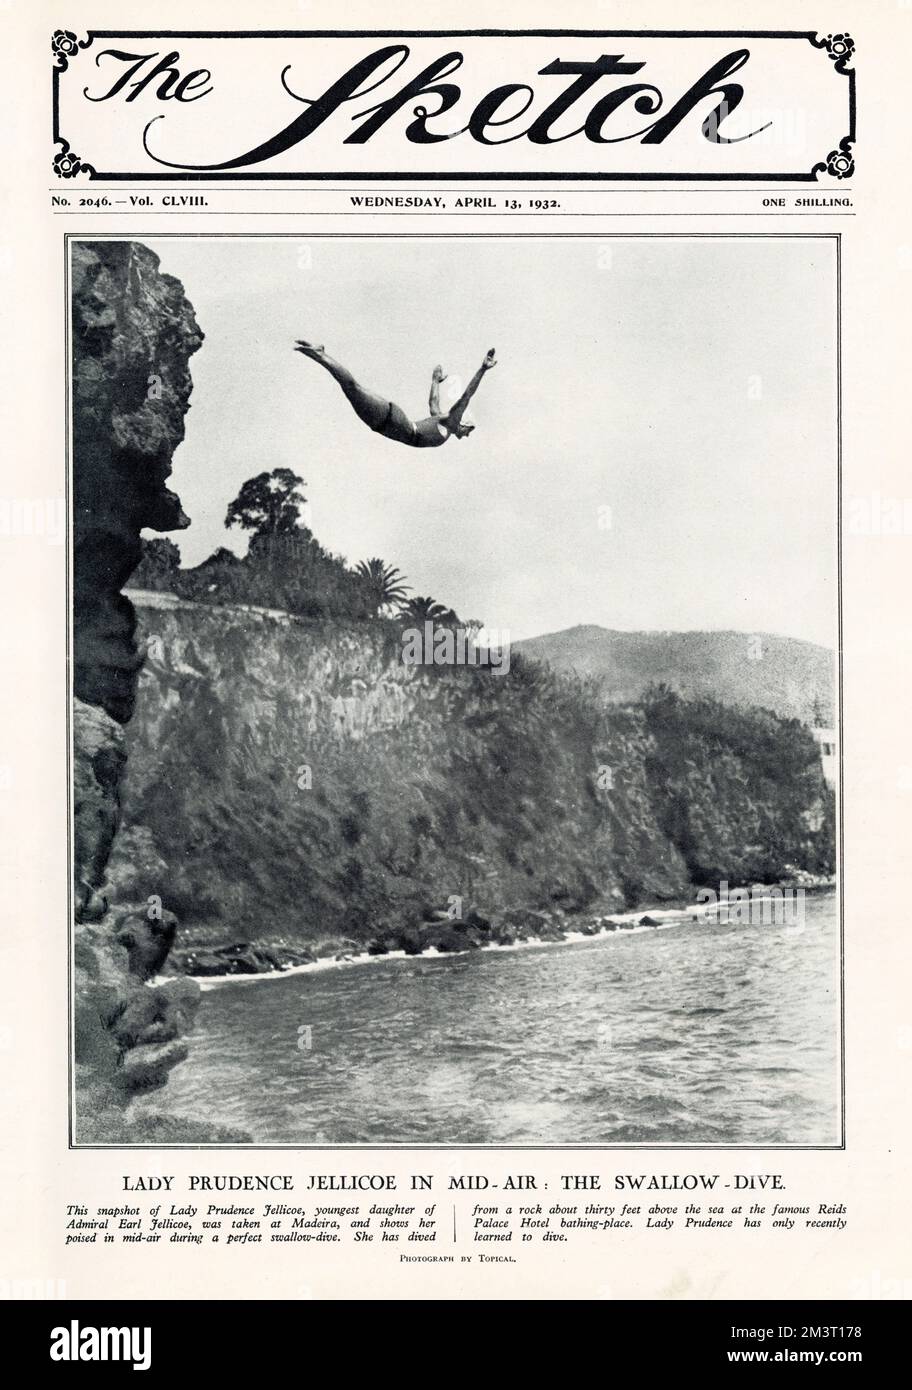 The perfect Swallow Dive - Lady Prudence Jellicoe (1913-), youngest daughter of Admiral Earl Jellicoe photographed in a dramatic pose in mid-air, 30ft above the sea, at the famous Reid's Palace Hotel Bathing Place, Madeira, Portugal.   1932 Stock Photo